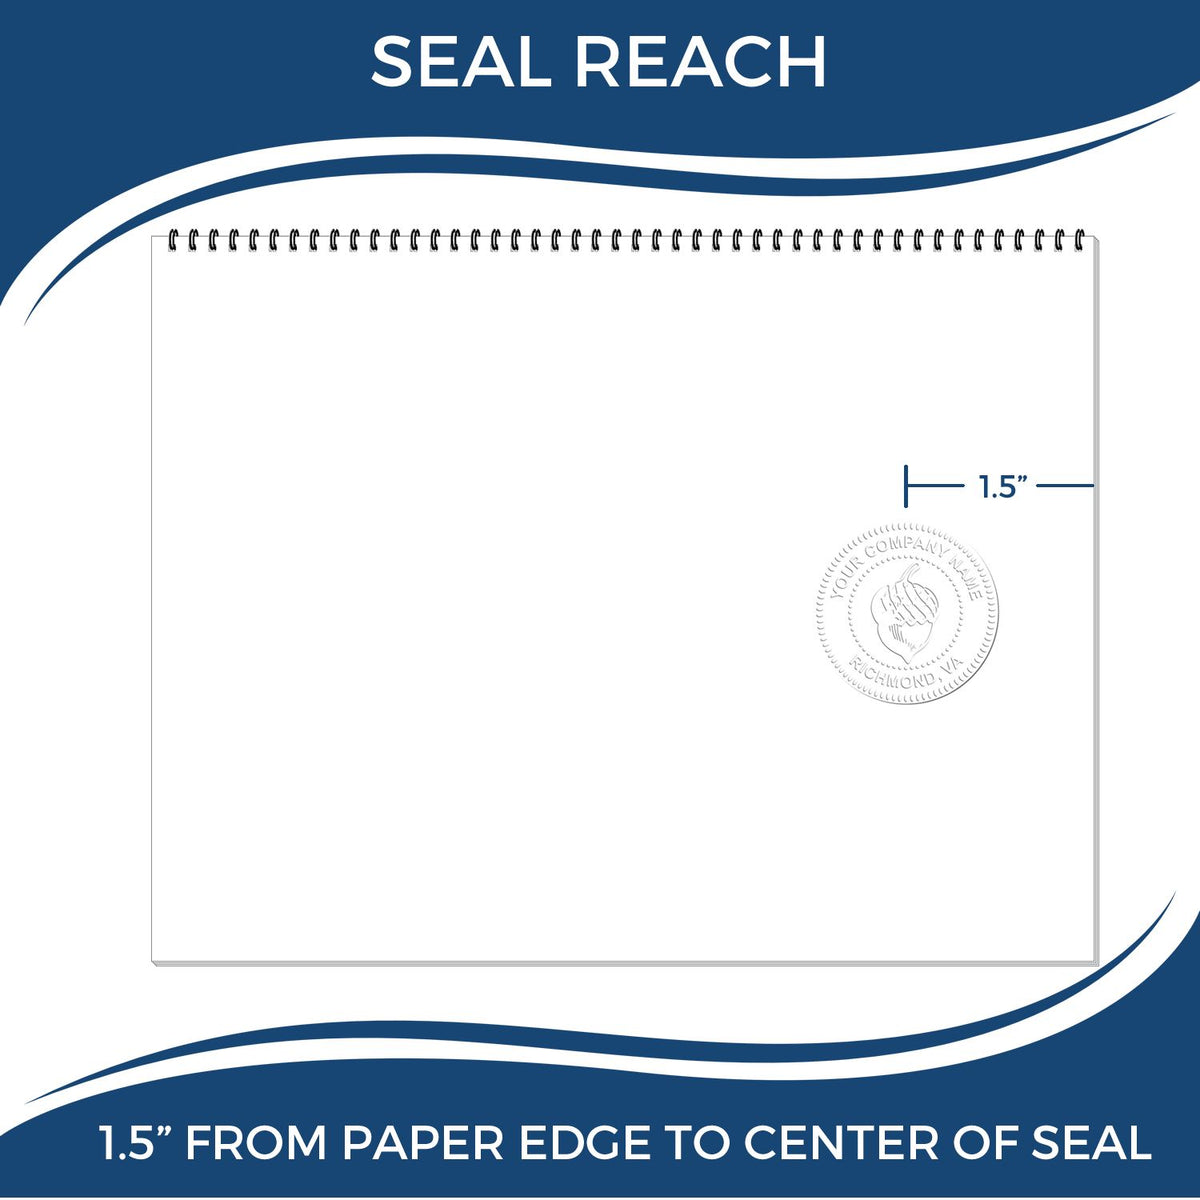 An infographic showing the seal reach which is represented by a ruler and a miniature seal image of the Hawaii Geologist Desk Seal